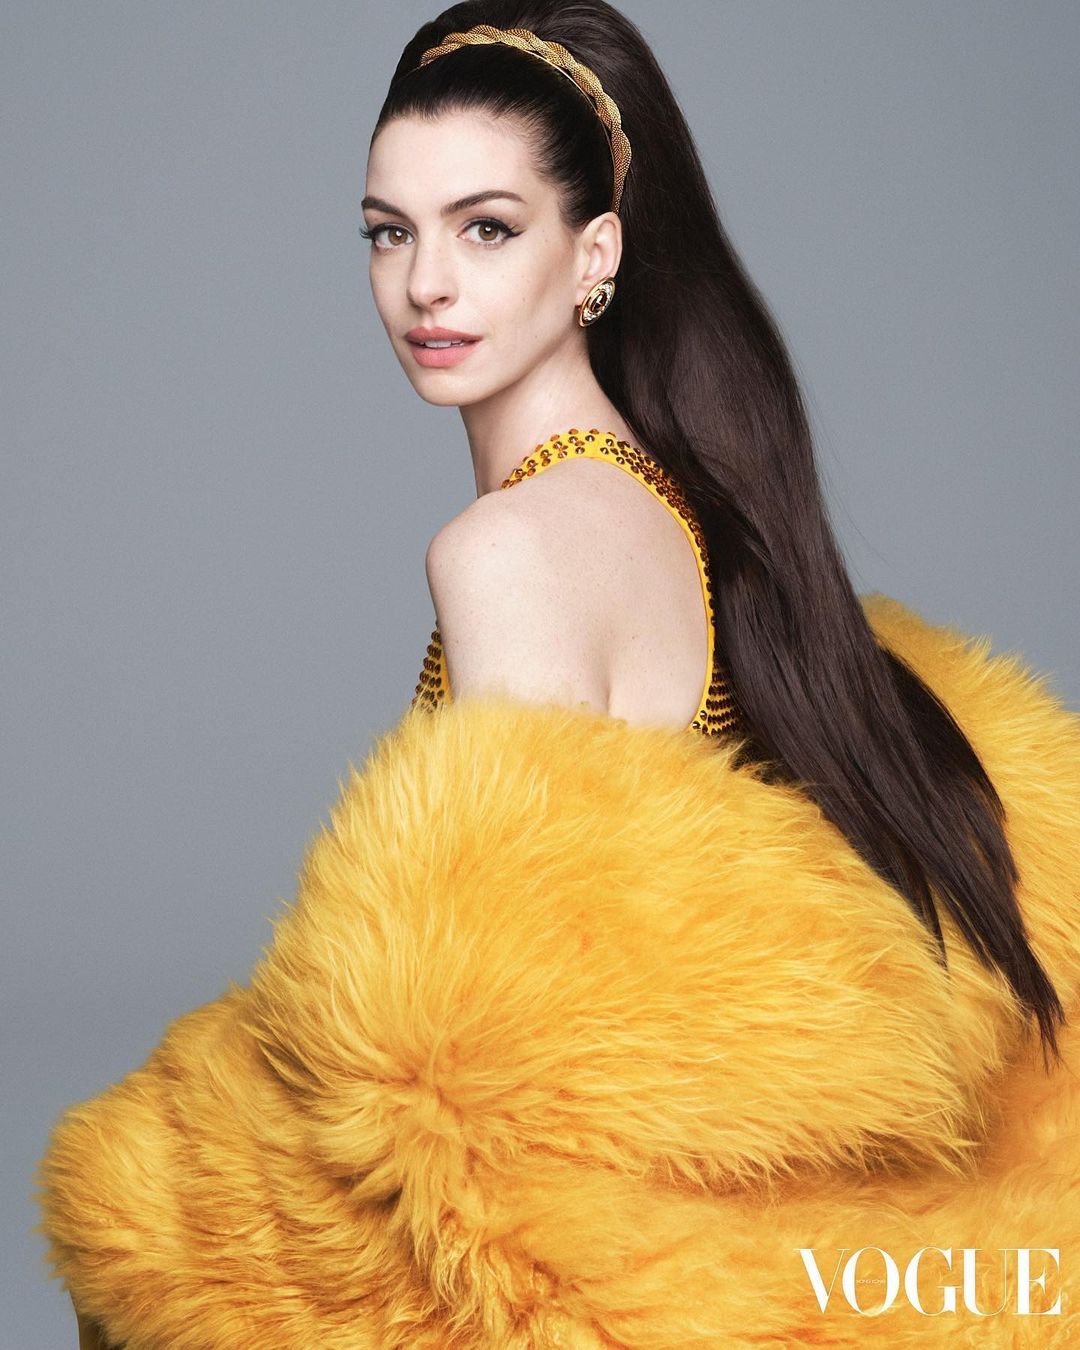 Anne Hathaway Cover Photo Shoot for Vogue Hong Kong Magazine, Oct 2022